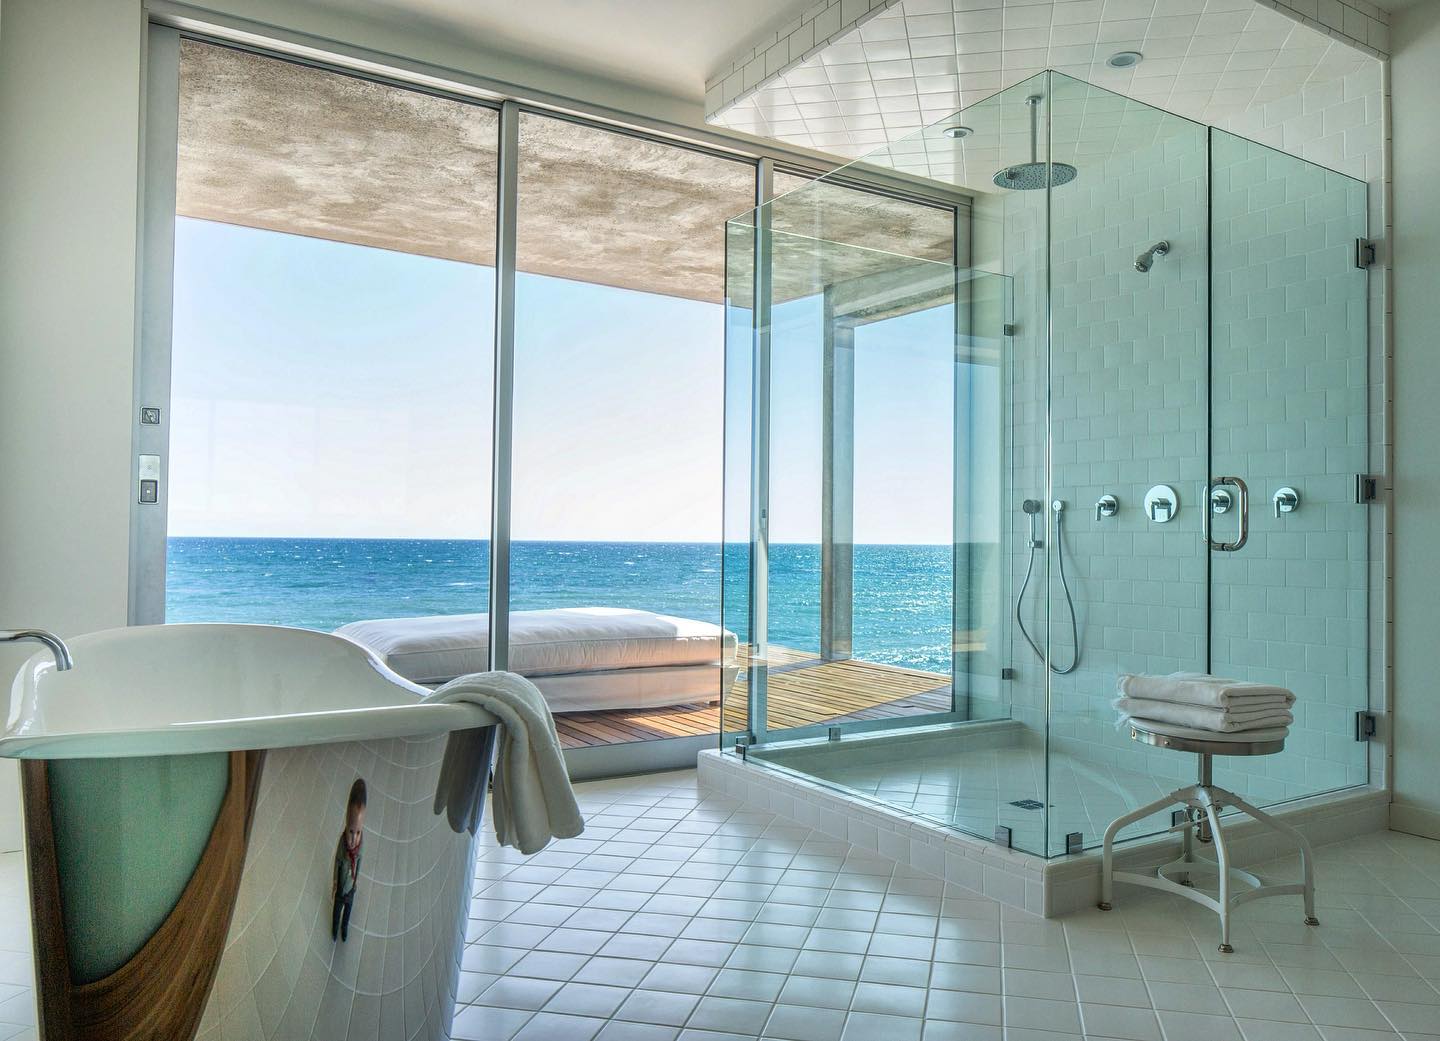 I try to hide something in the best places, check out that ocean view. Check out that shower, you’re not gonna shower here if you’re shy. Epic home on Malibu Road. What do you see? #scottgillendesign